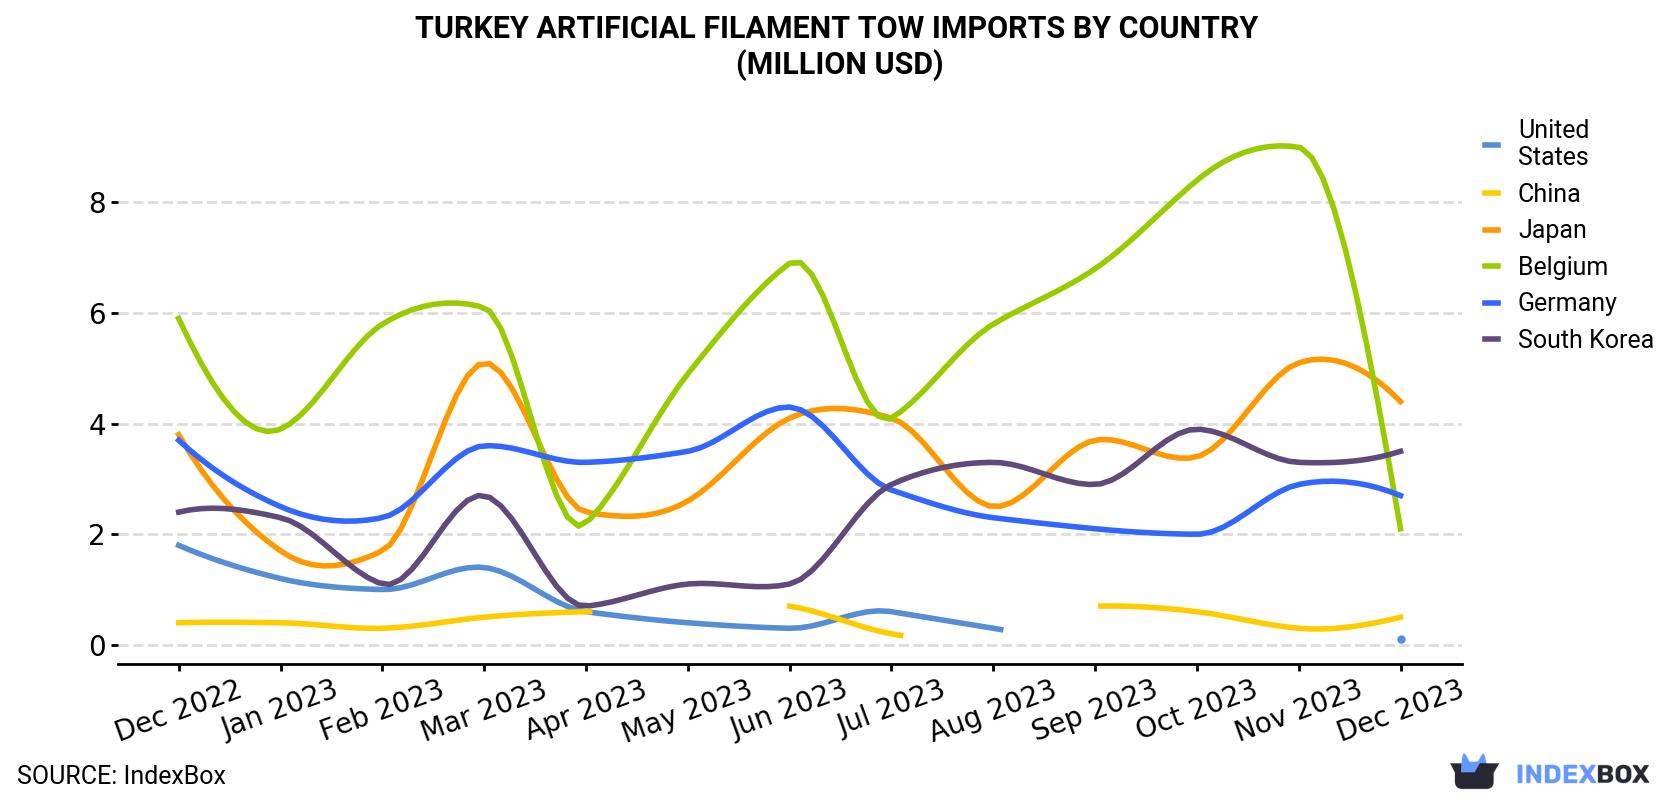 Turkey Artificial Filament Tow Imports By Country (Million USD)